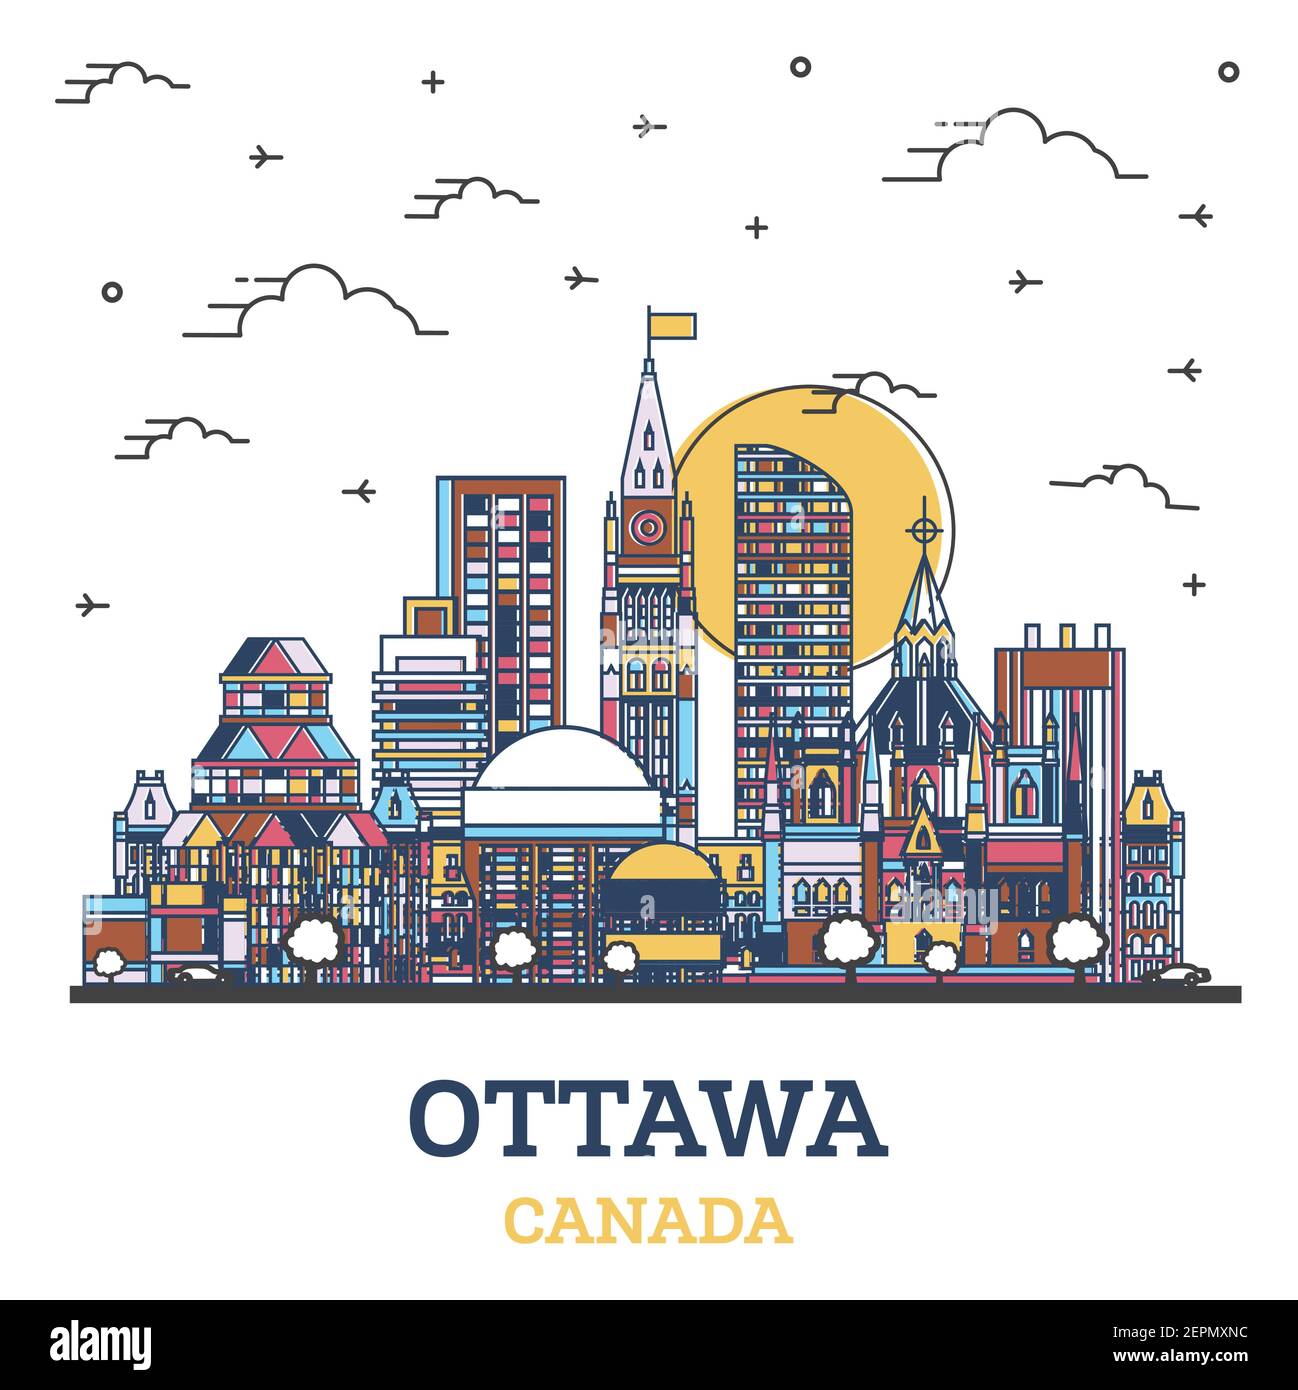 Outline Ottawa Canada City Skyline with Colored Modern Buildings Isolated on White. Vector Illustration. Ottawa Cityscape with Landmarks. Stock Vector